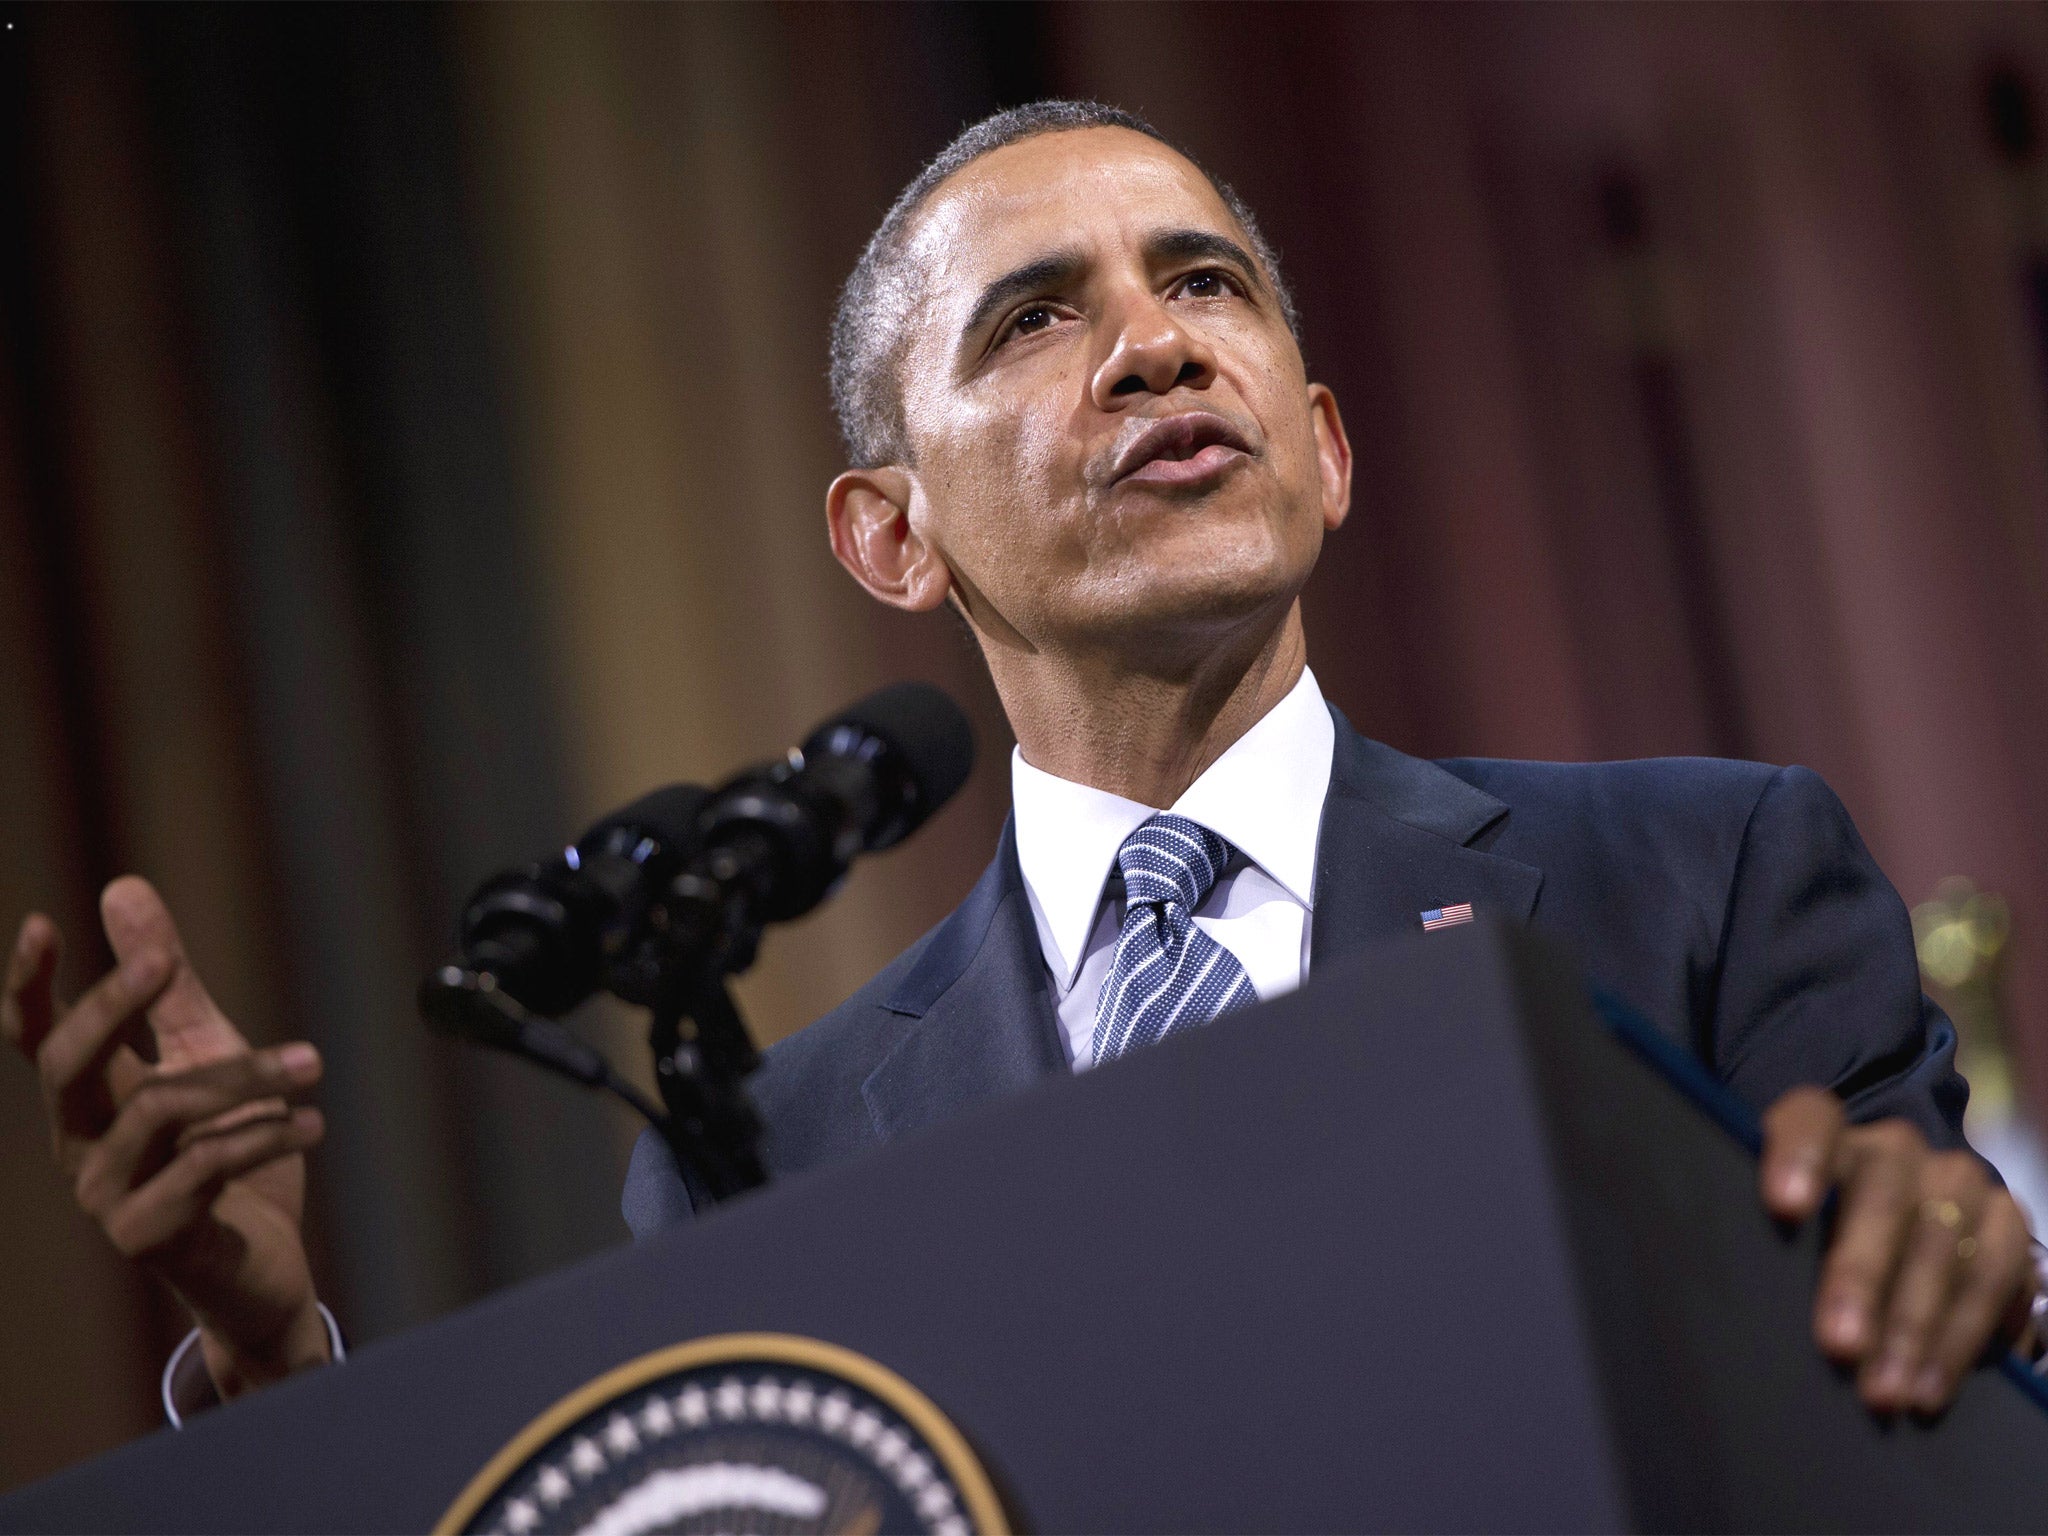 US President Barack Obama delivers a speech at the Palais des Beaux-Arts in Brussels